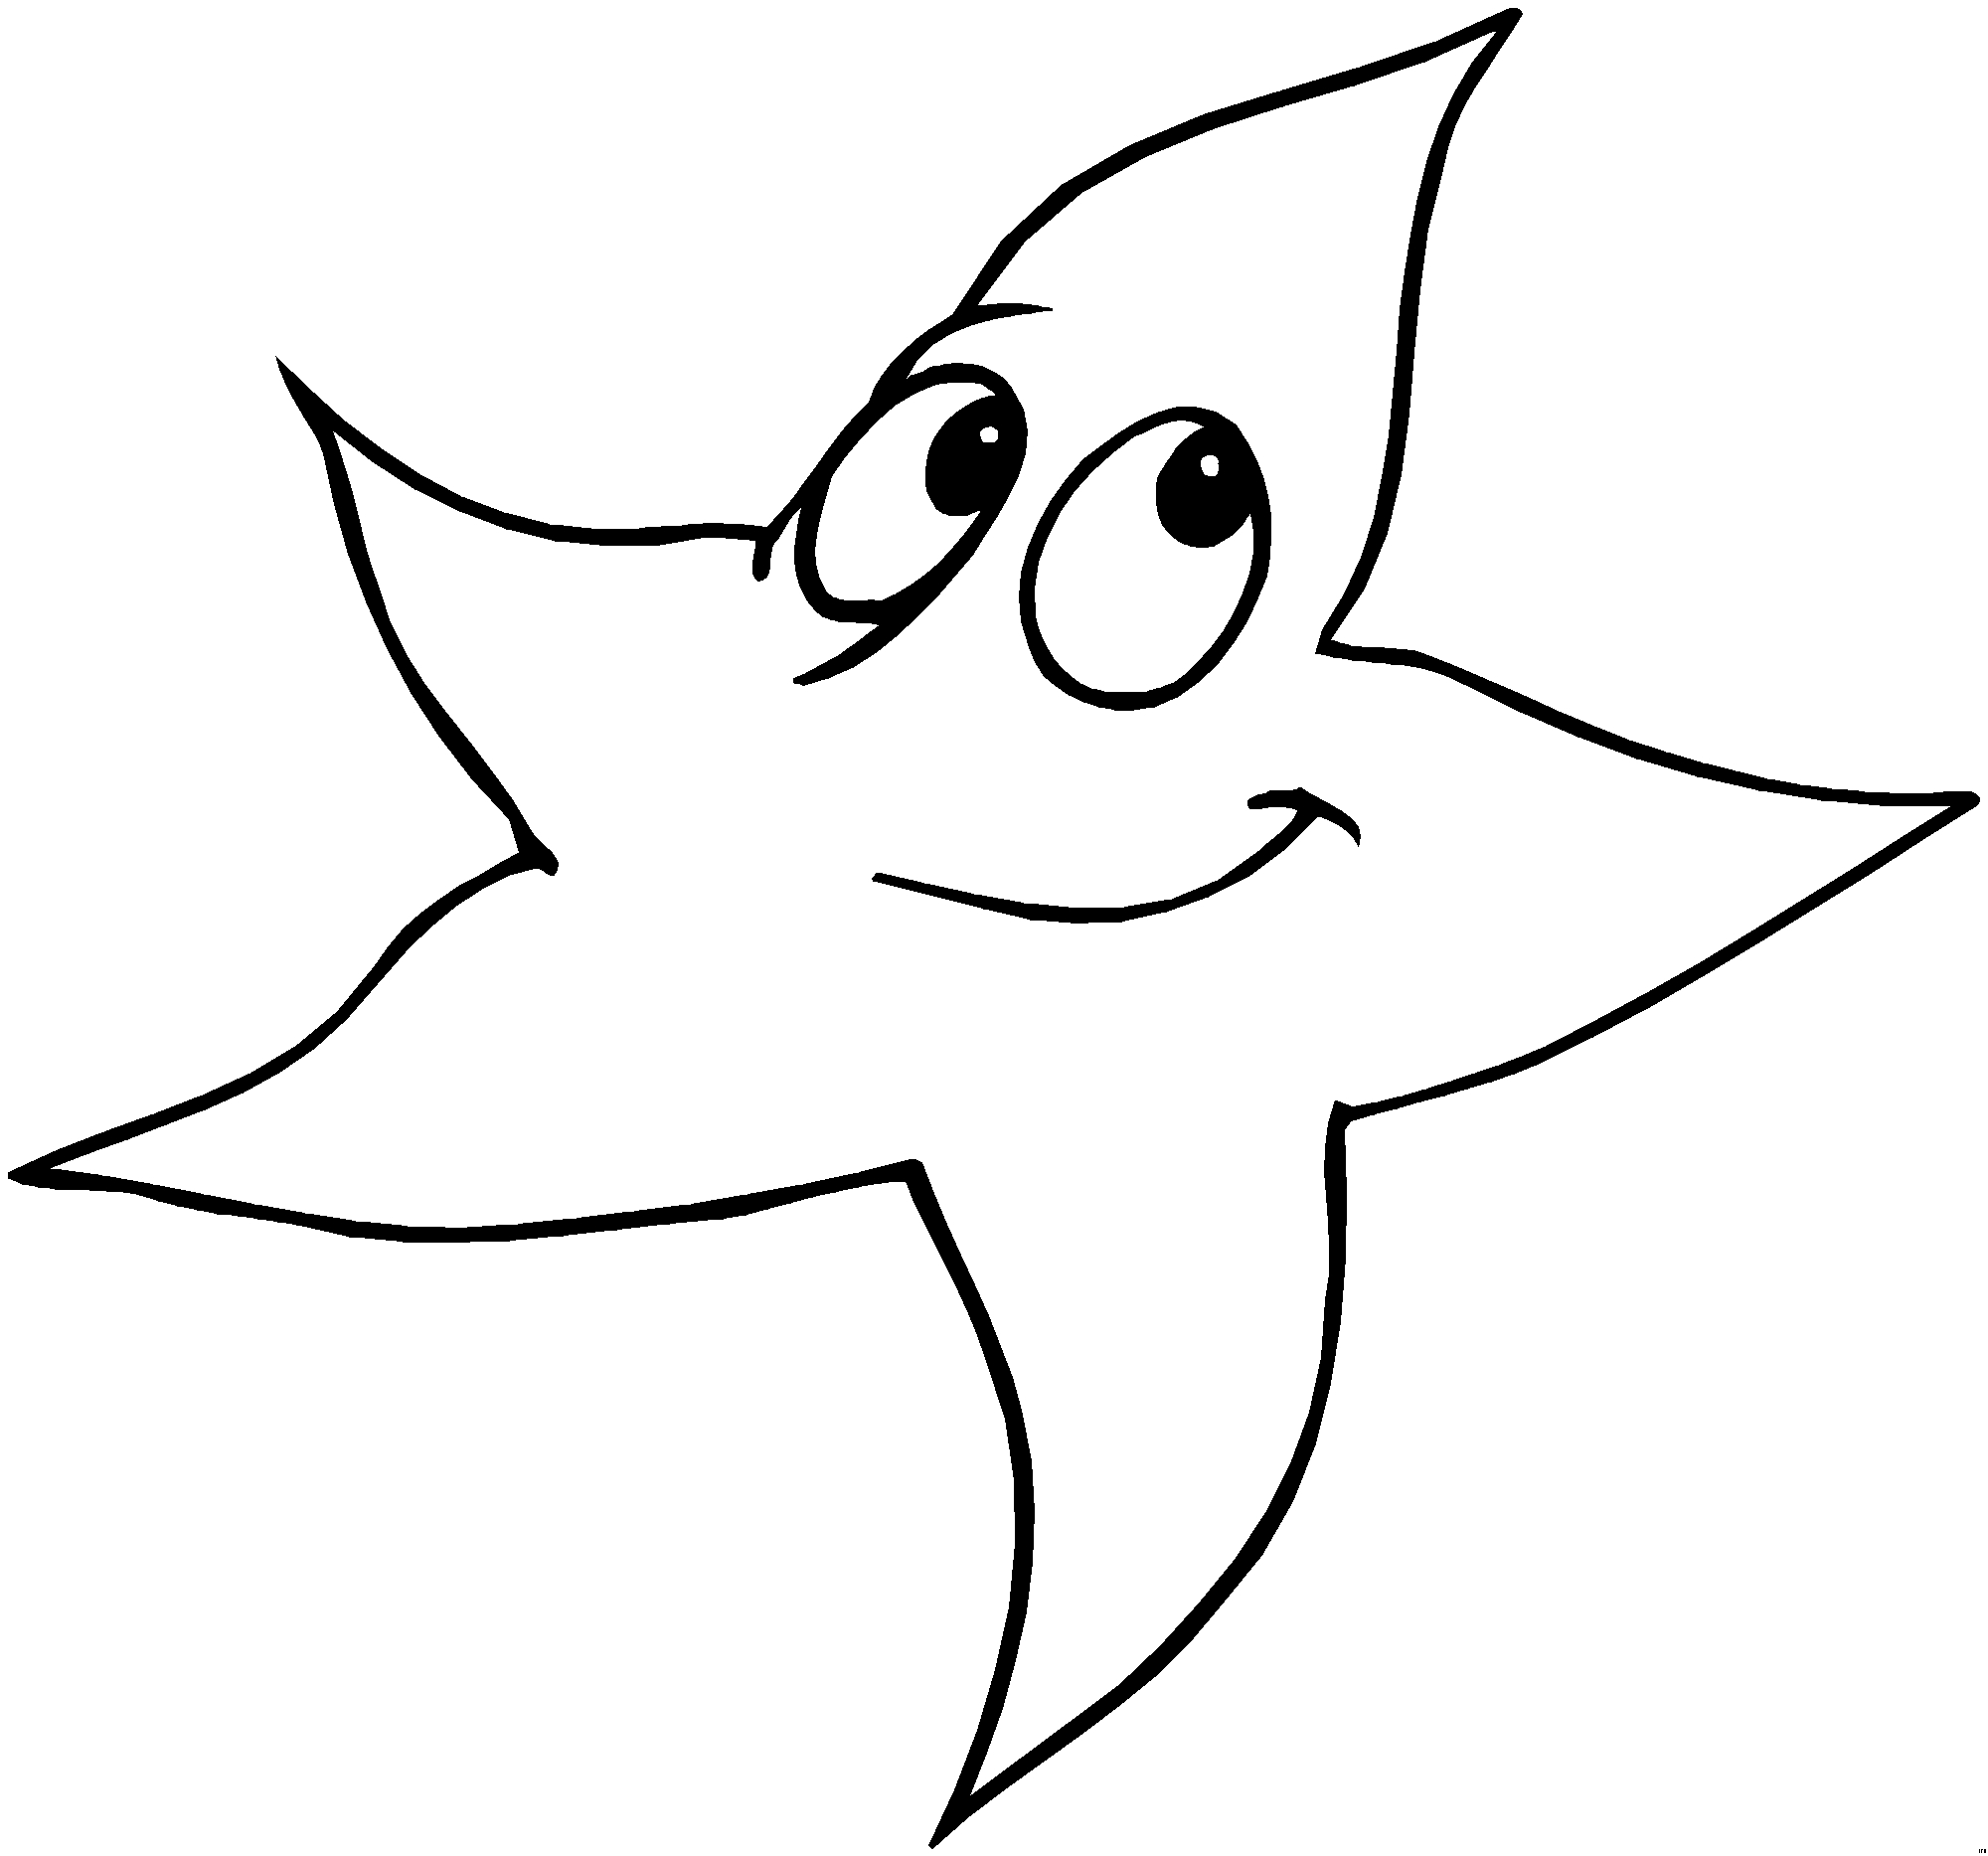 Coloring Page Of A Star Coloring Page Star Picgifs